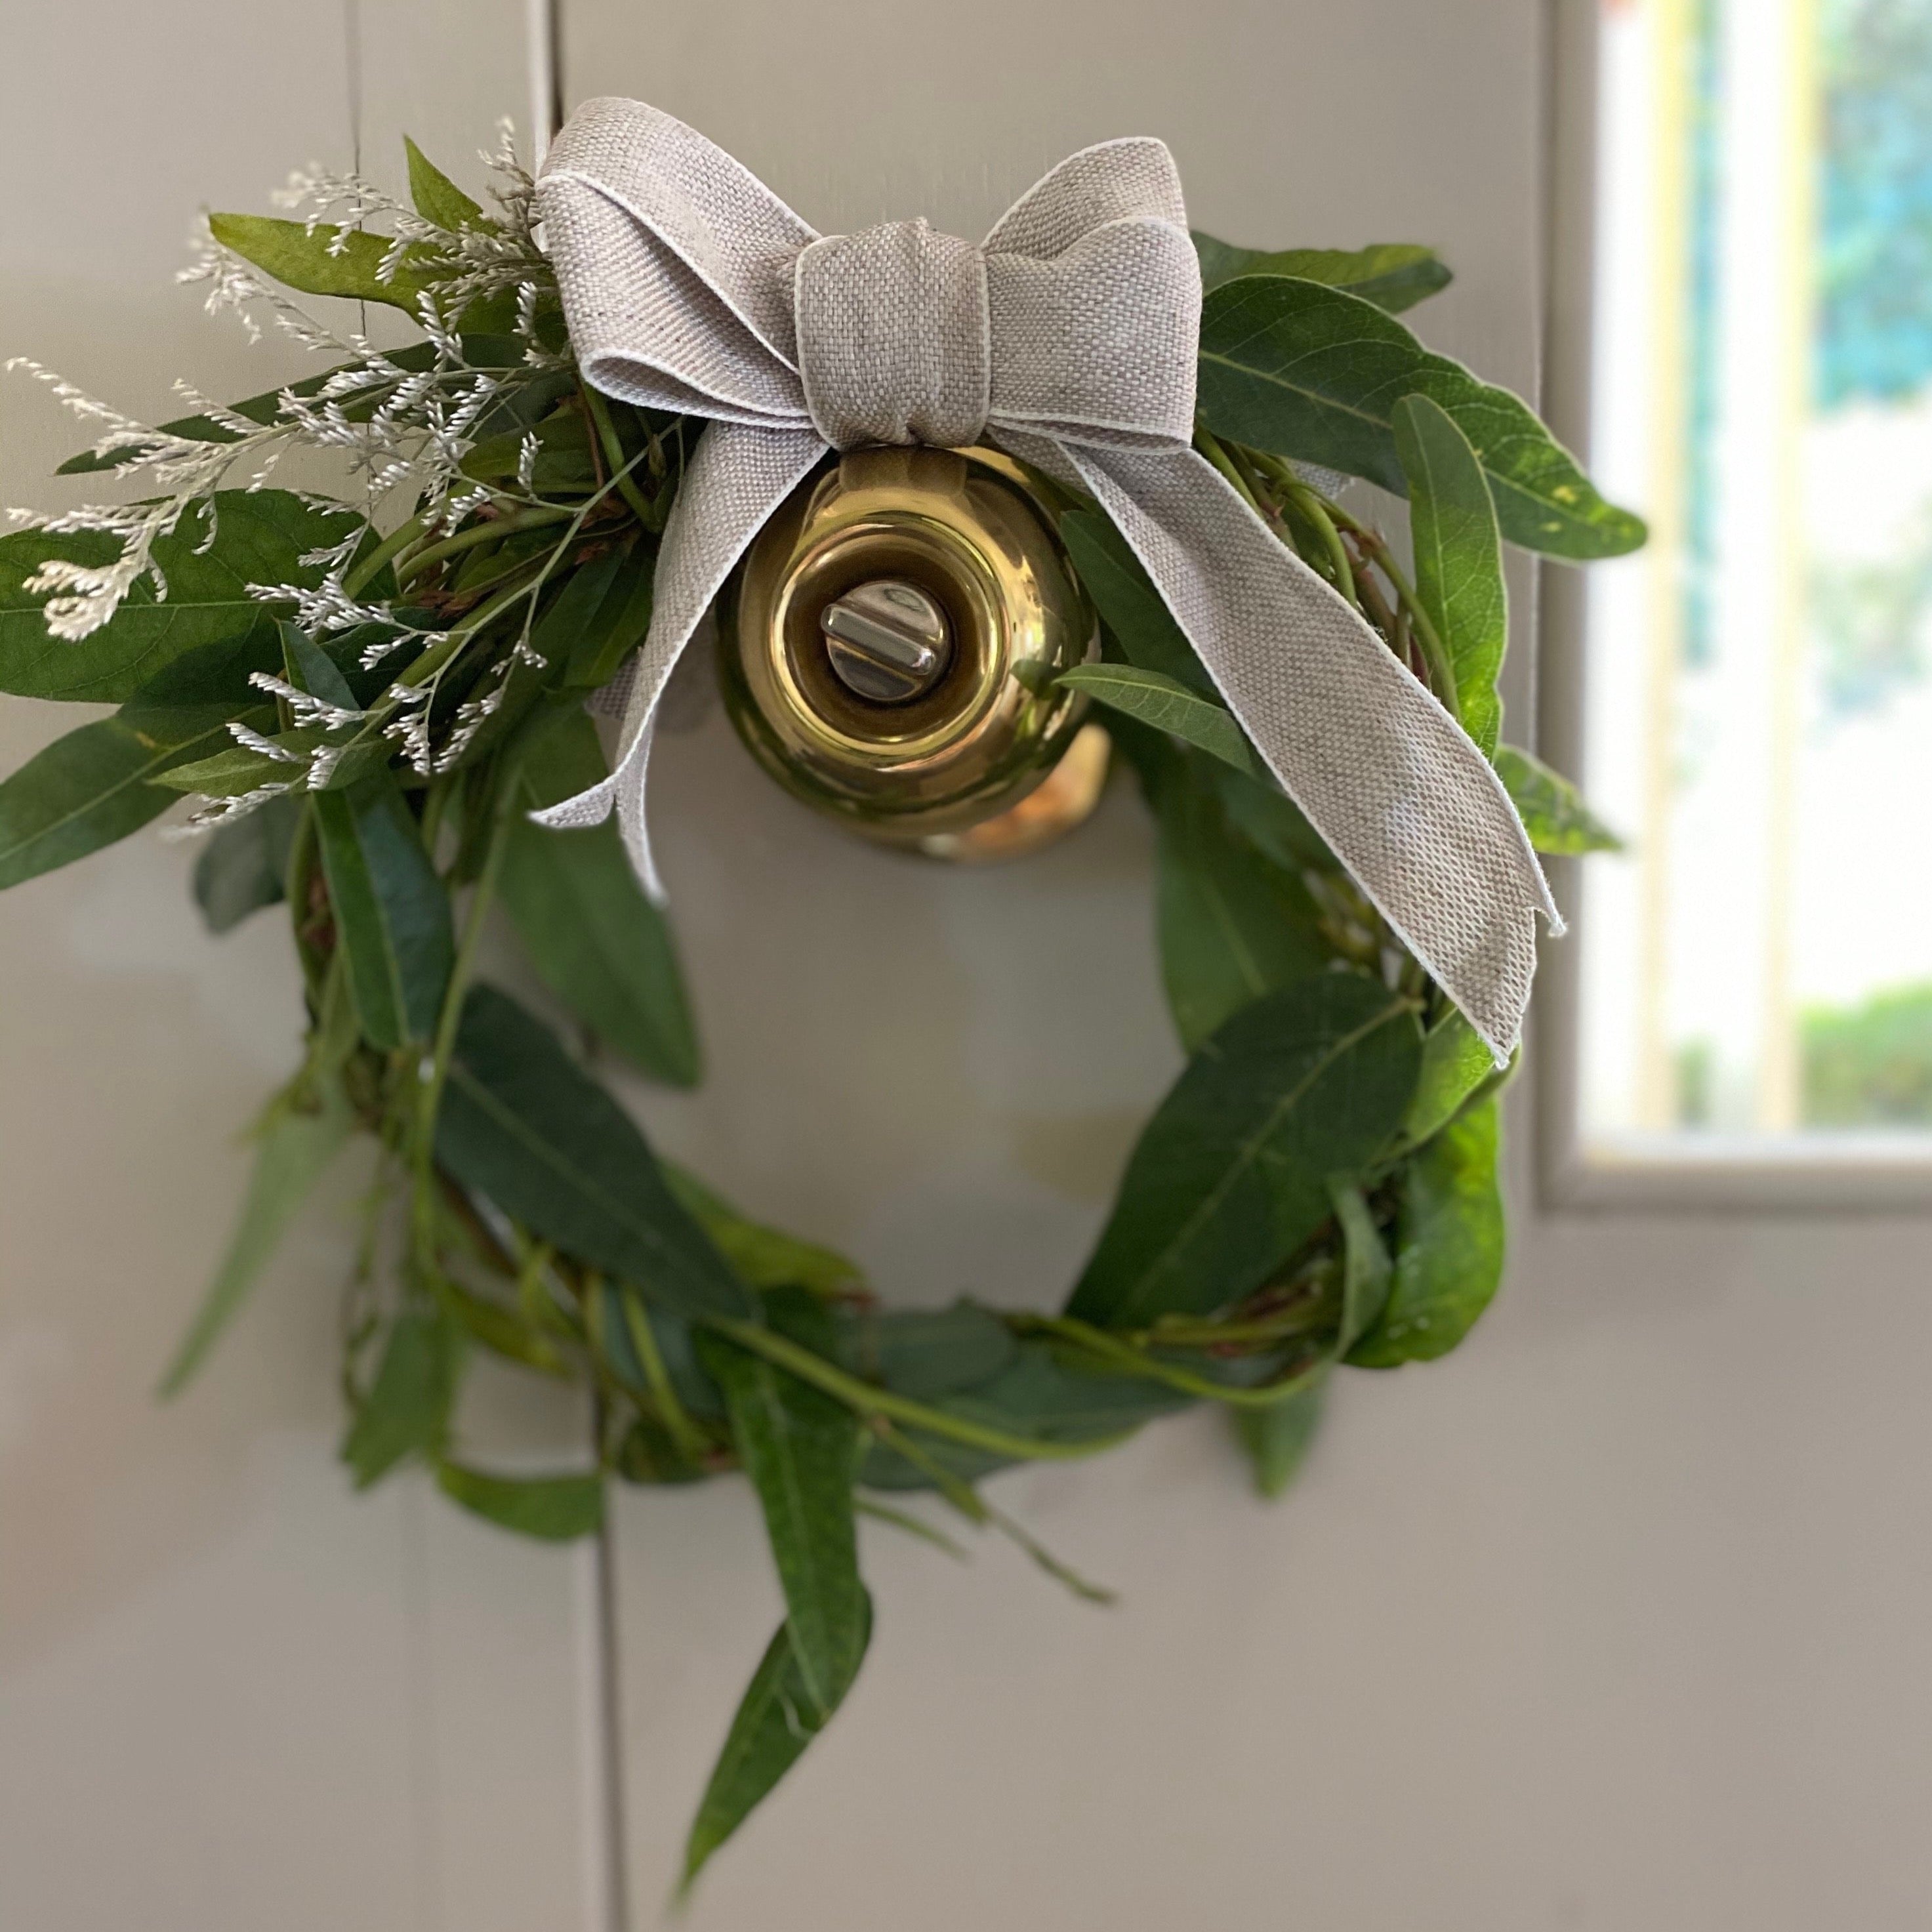 Rupanyup Living Wreath - From the farm 